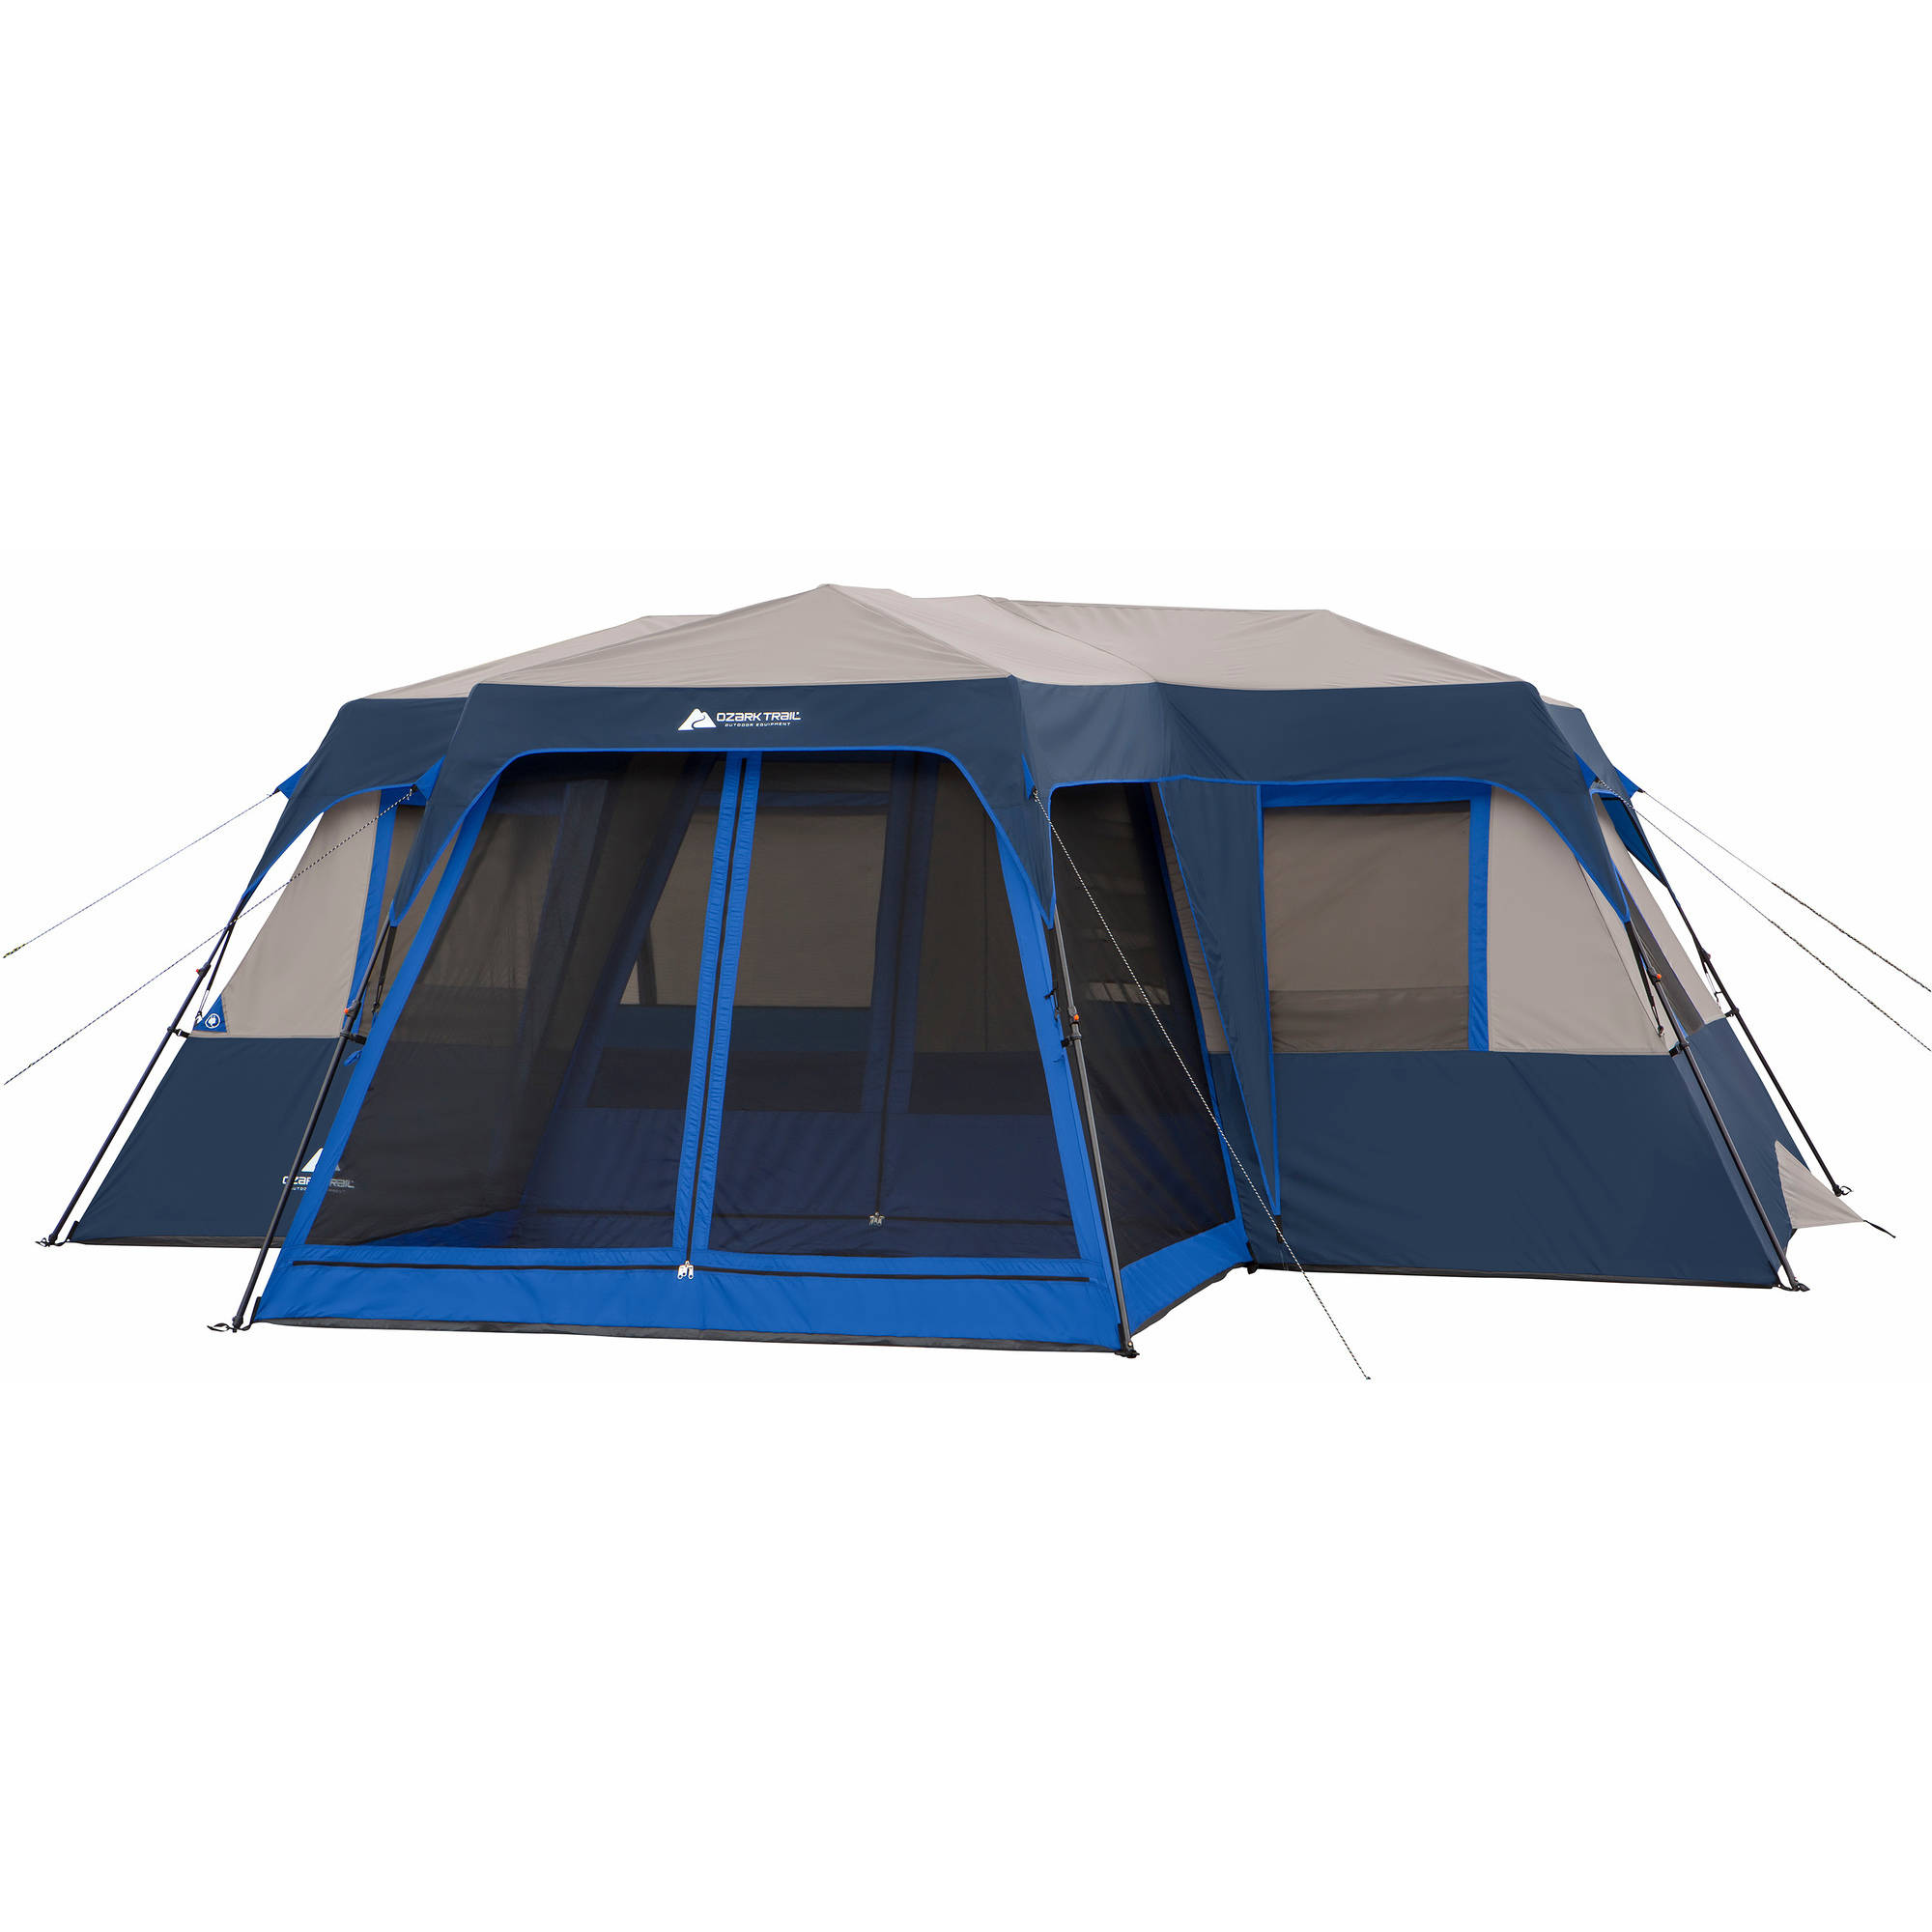 Ozark Trail 12 Person 2 Room Instant Cabin Tent with Screen Room - image 1 of 10